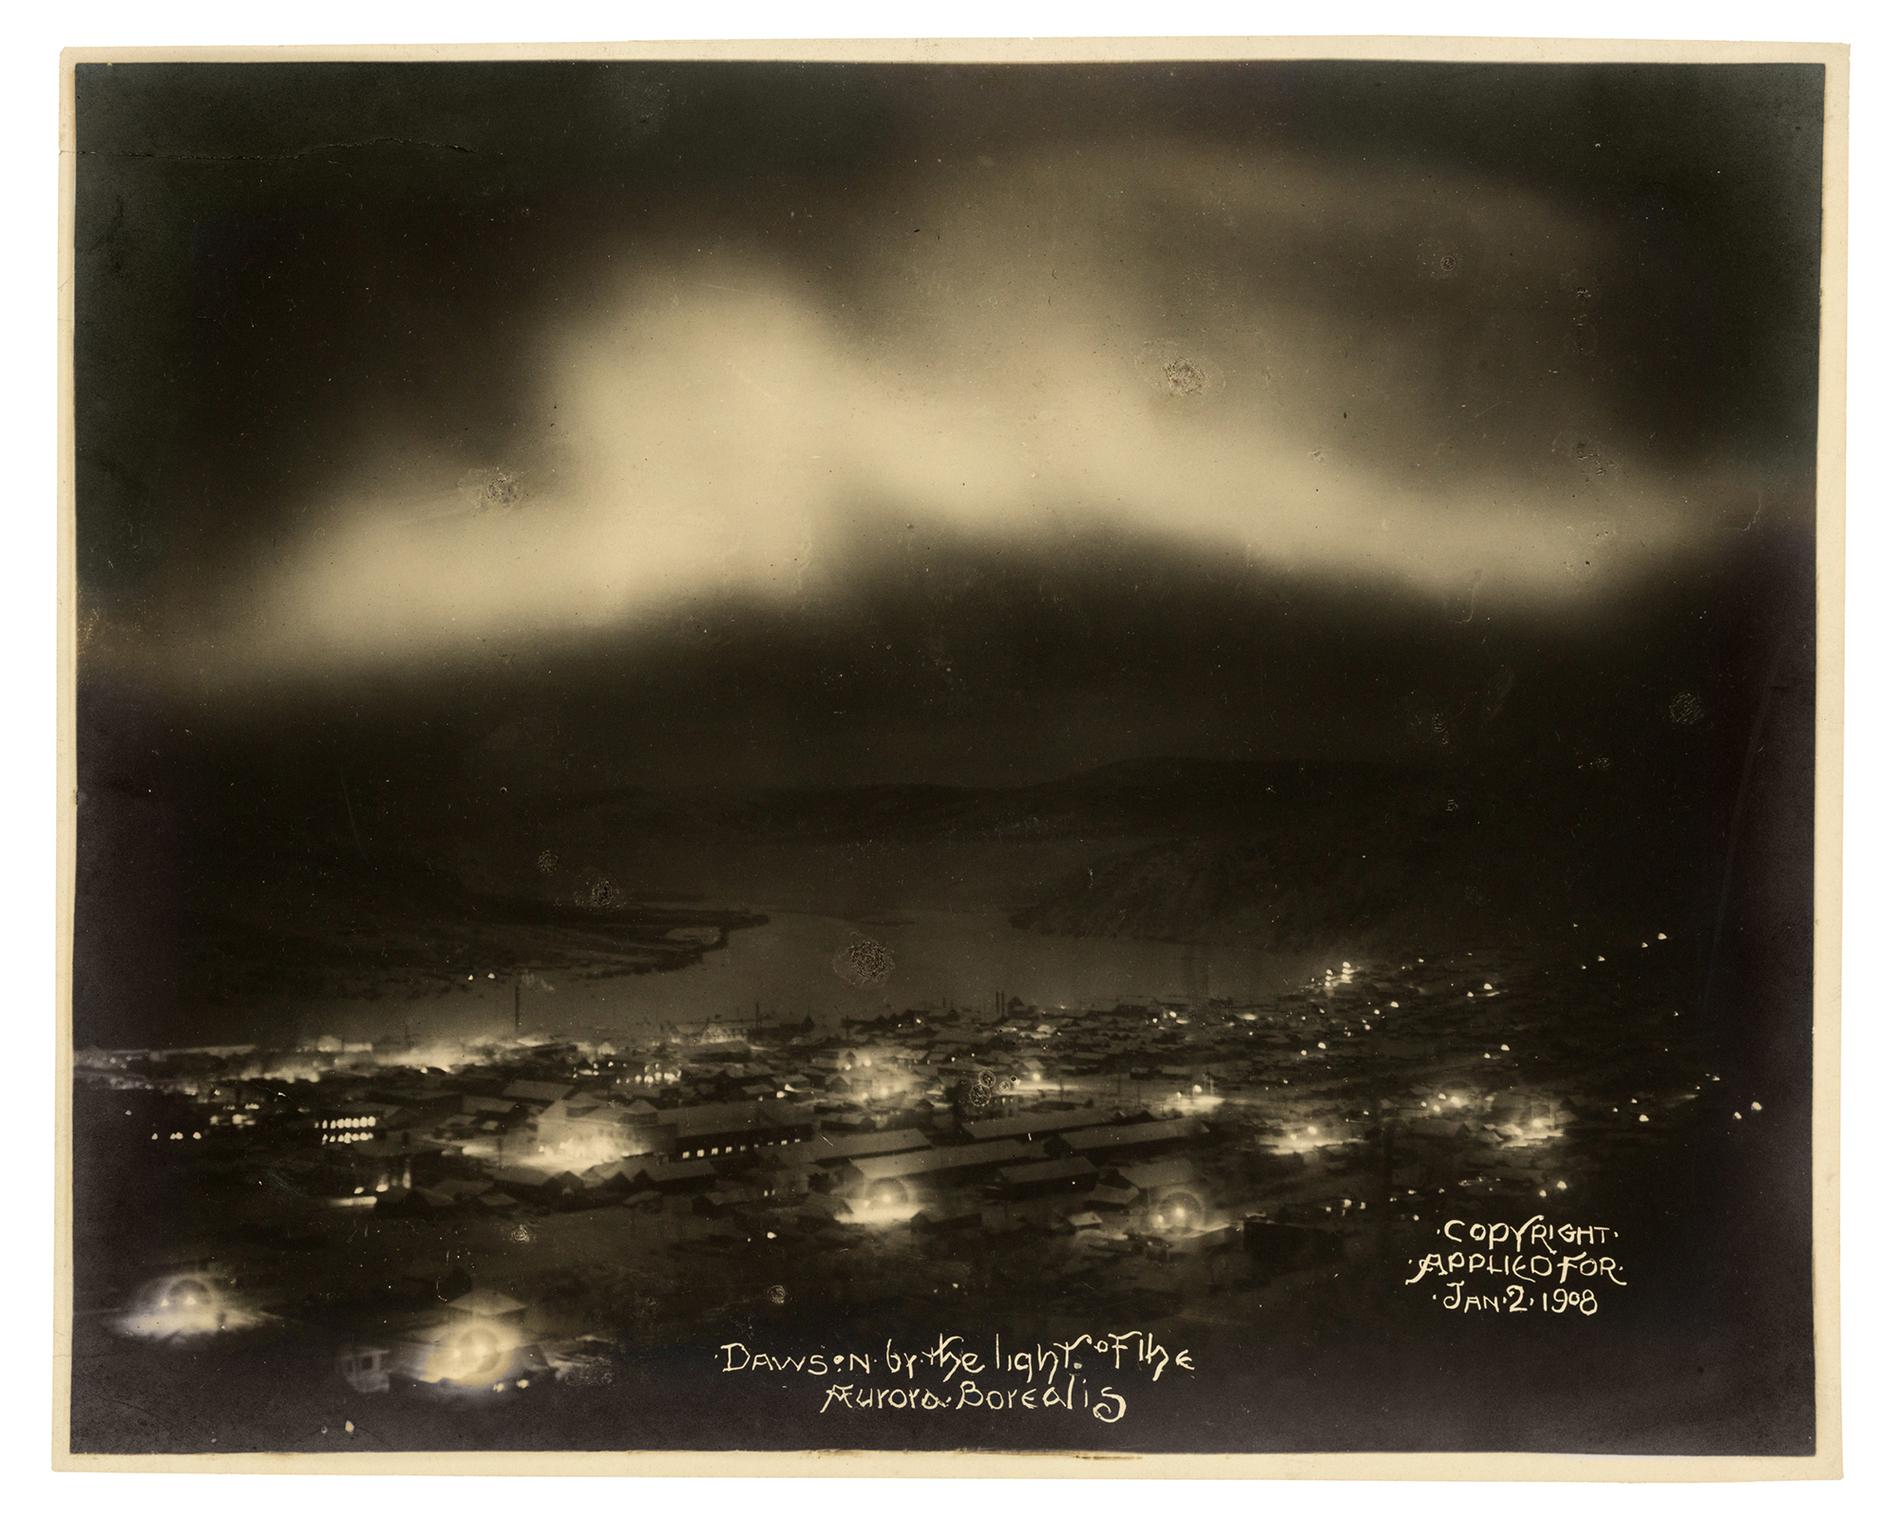 A black and white photograph overlooking a small town at night with lights and a band of aurora borealis in the sky